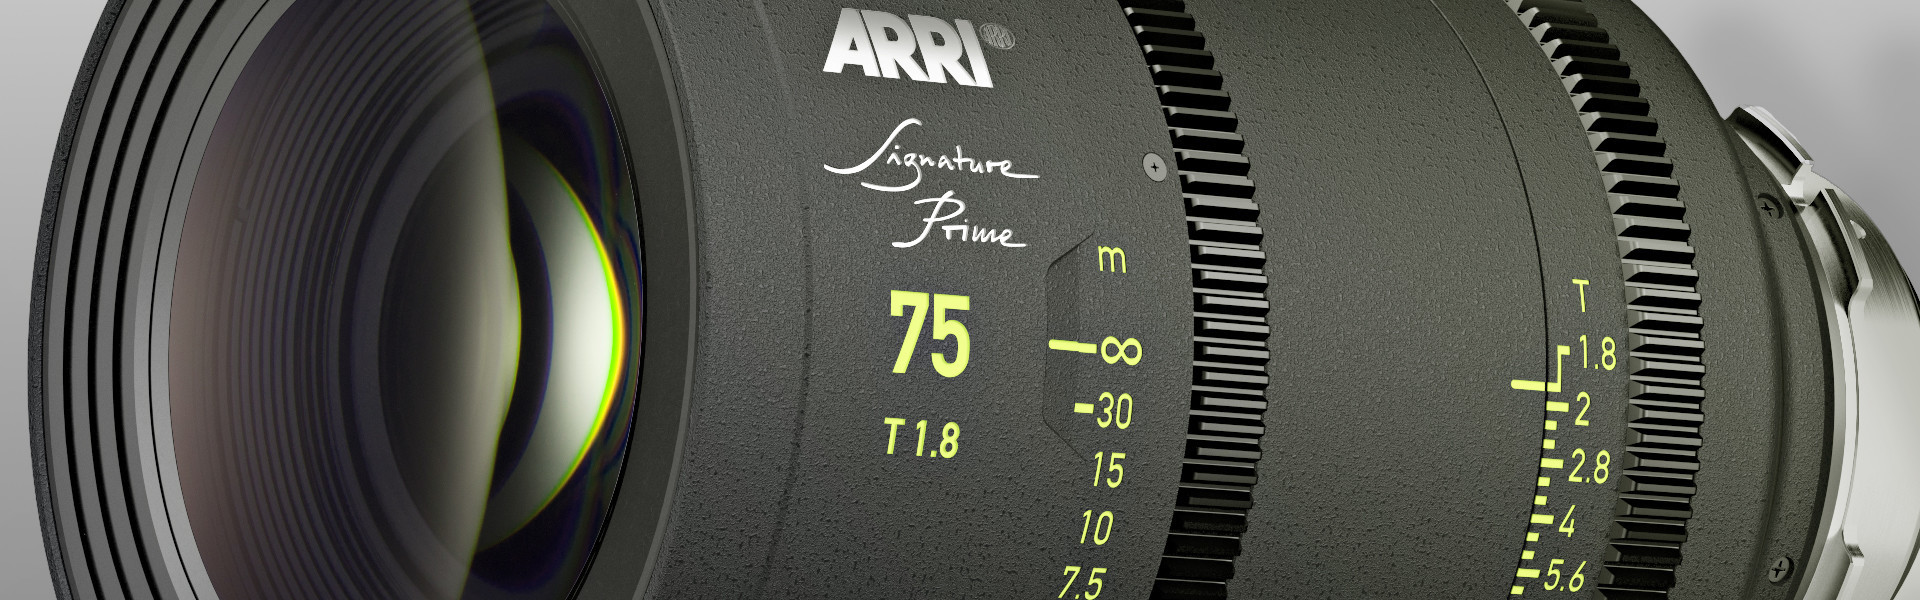 Header image for article New ARRI Signature Primes, Field of View, and ALEXA LF Sensor Modes